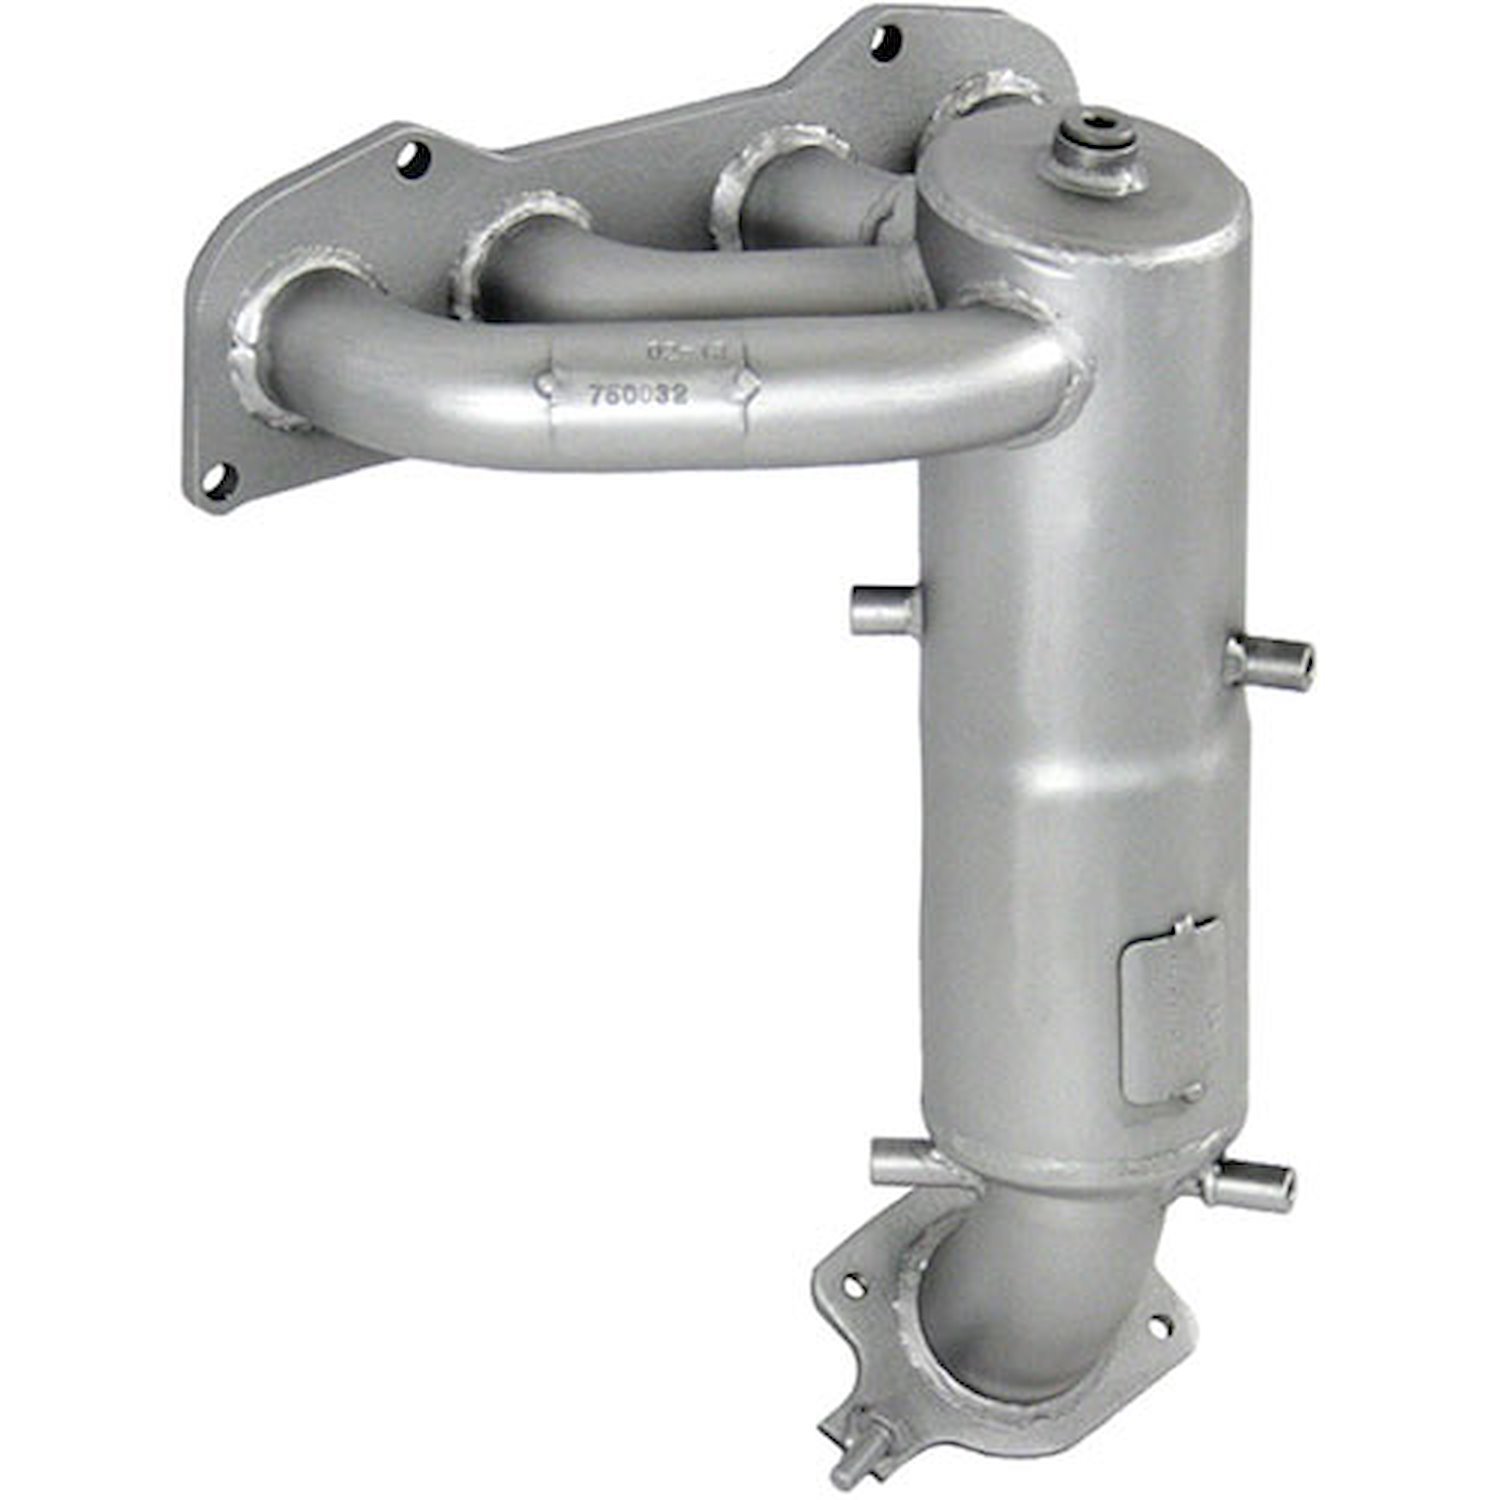 Pacesetter Manifold Converter, Direct replacement of OEM, Stainless steel, Low restriction tubular manifold design